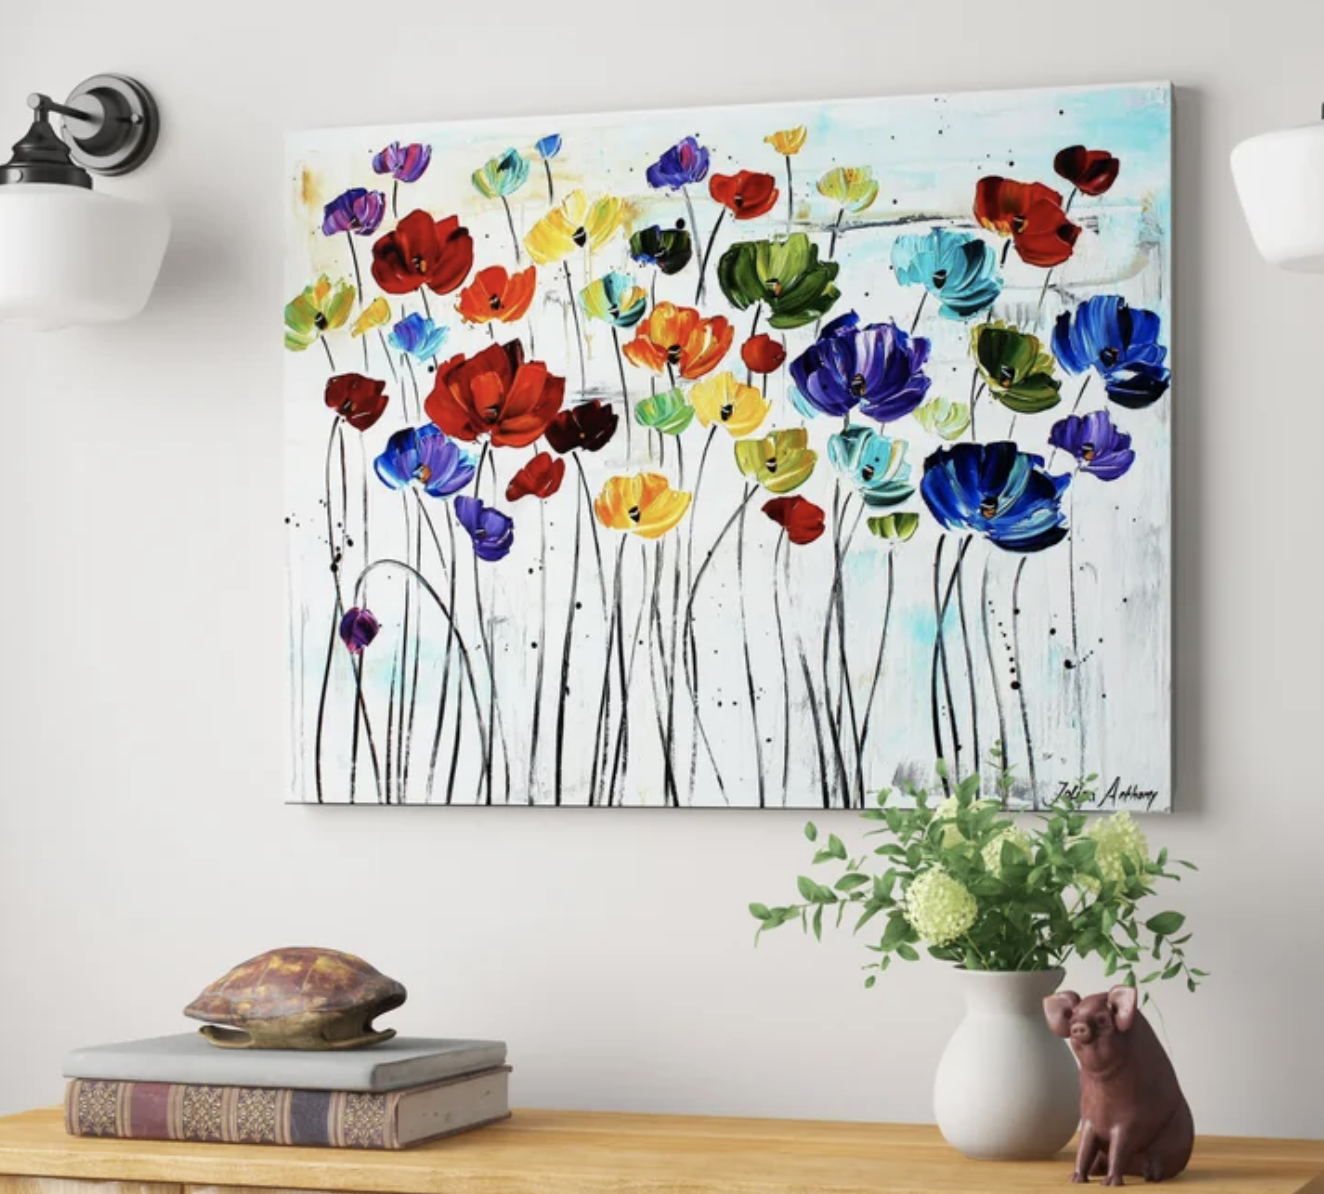 Abstract painting of assorted flowers displayed above a shelf with decorative figures